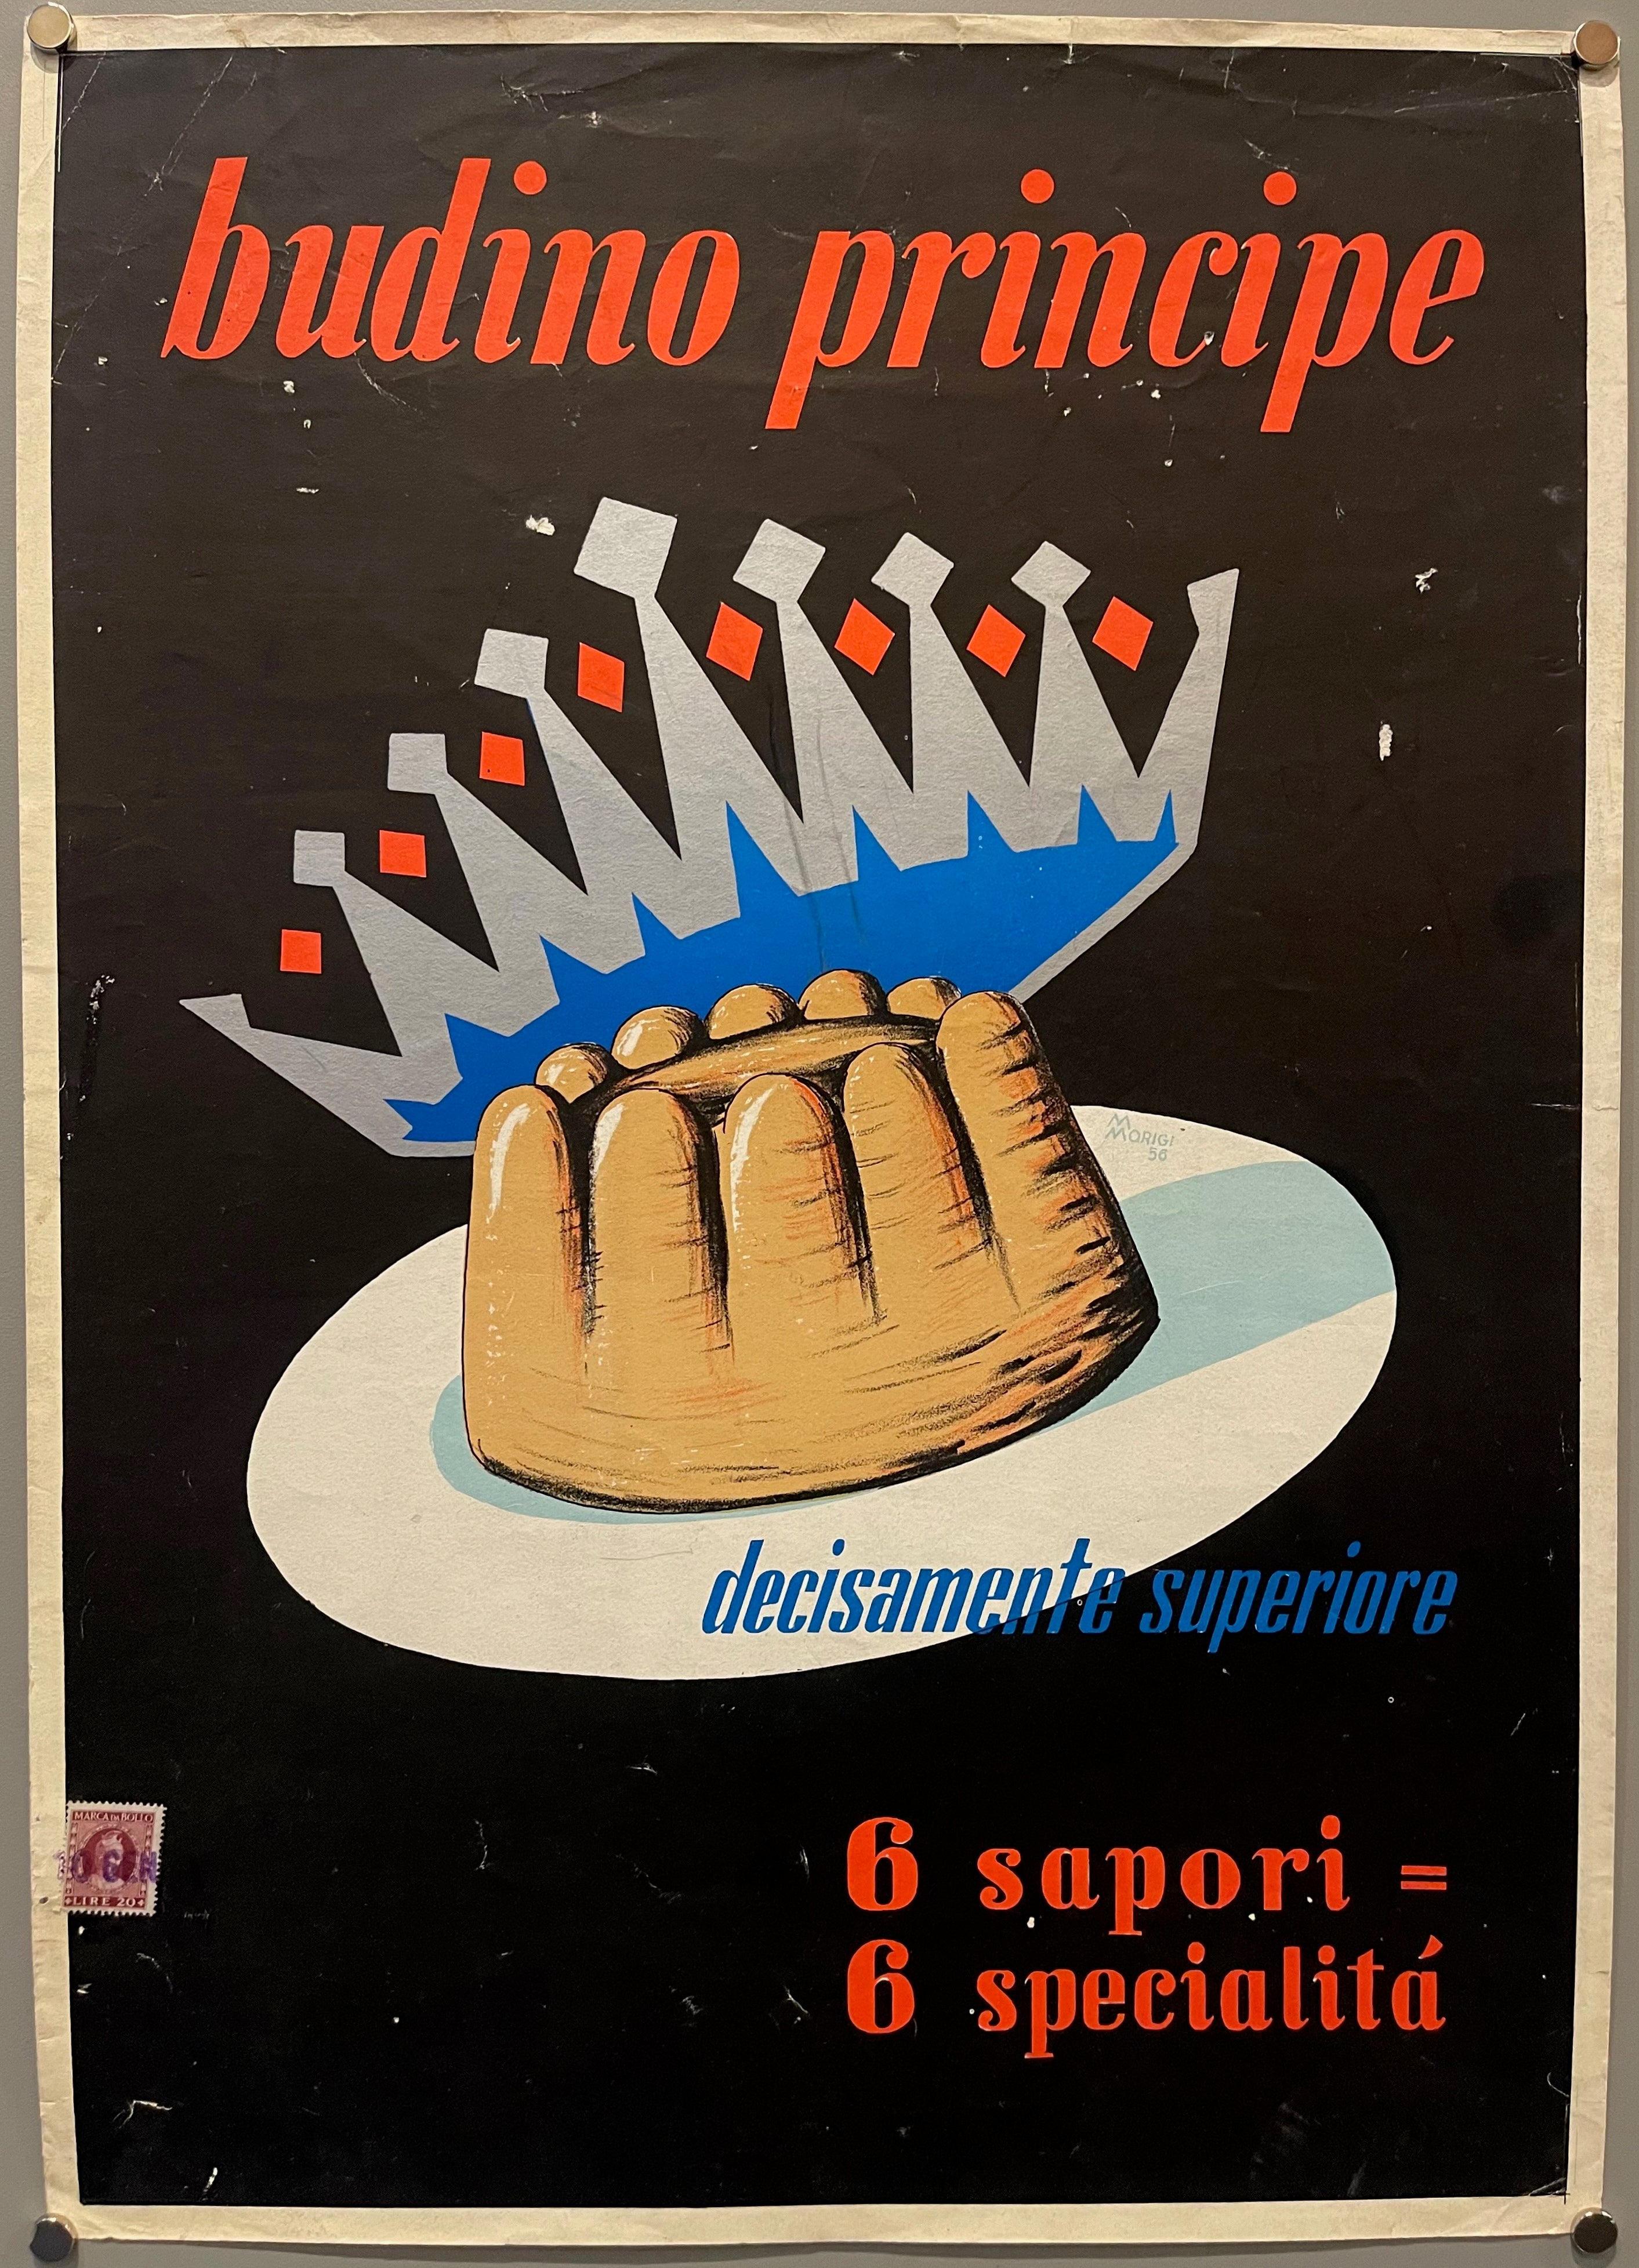 19x13.5 advertisement for italian pudding "budino principe" featuring drawing of pudding with silver crown on it and slogan against black background